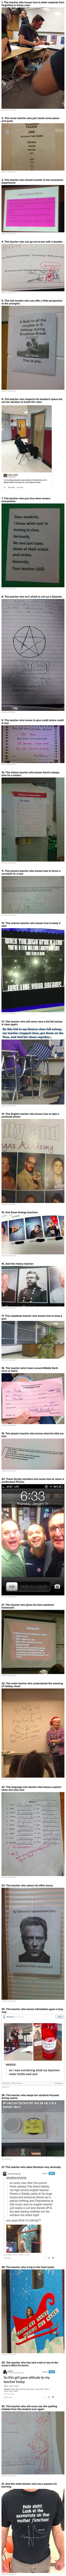 Here are some funny and nerdy teachers who make school interesting.